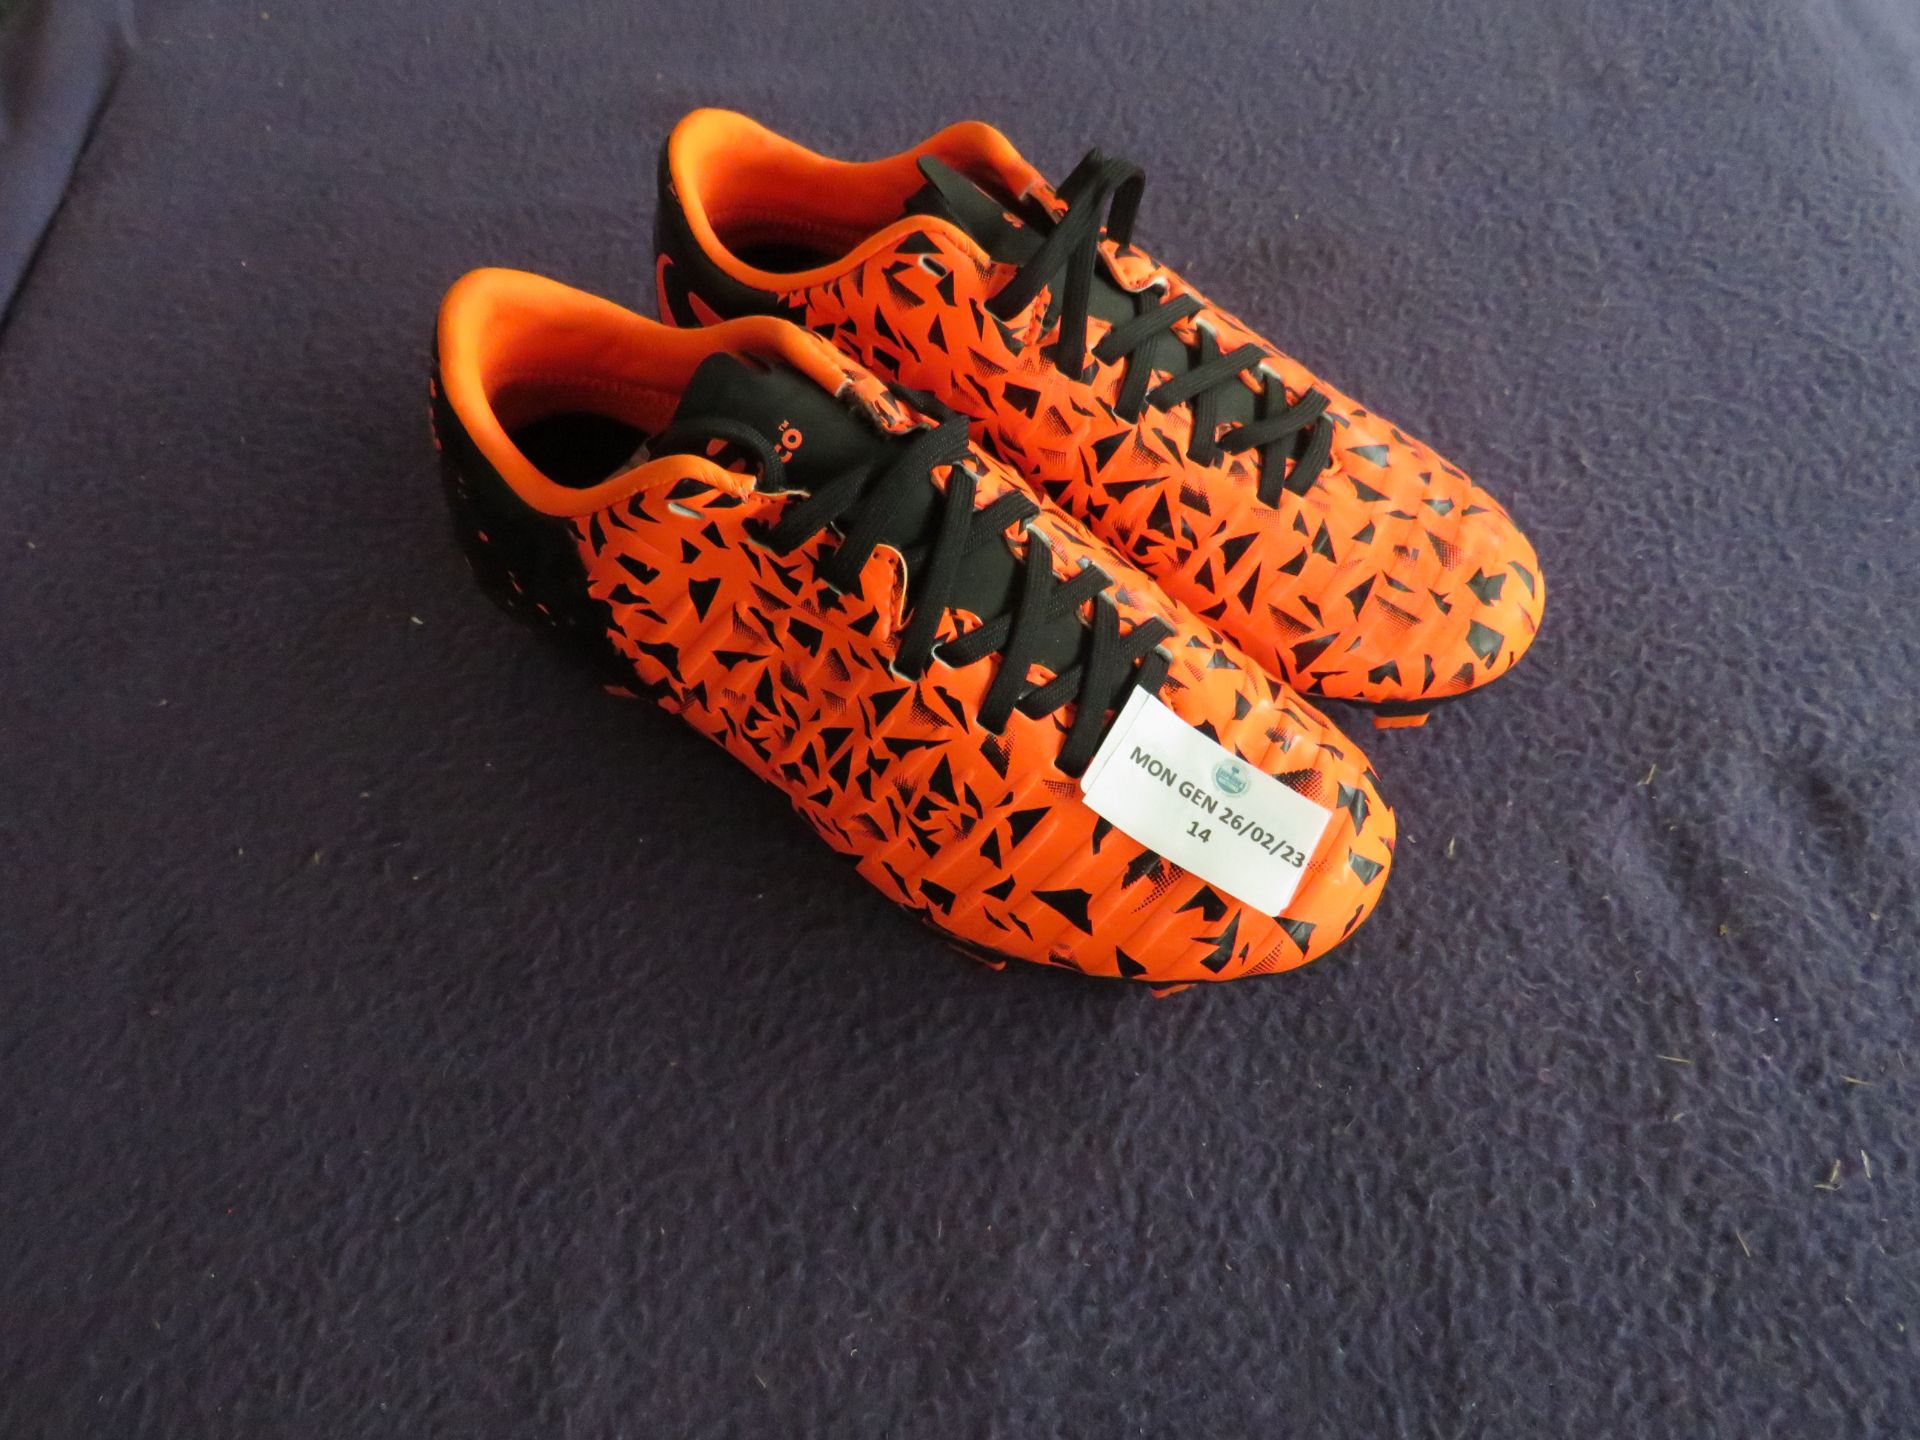 Sondico Blade football Boots - Size C11 - Good Condition, No Packaging.